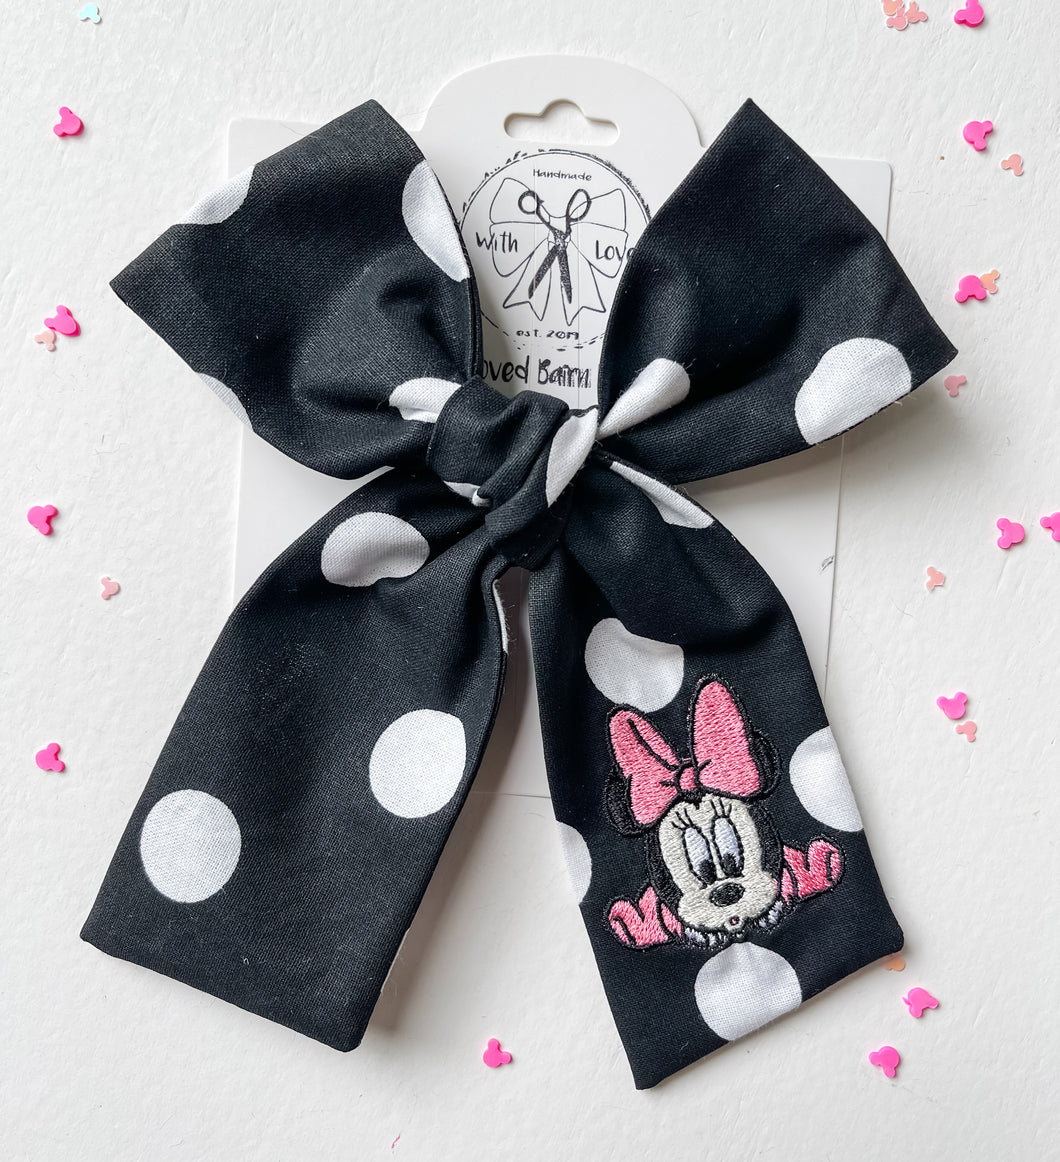 Baby Minnie Embroidered Bows (B&W)